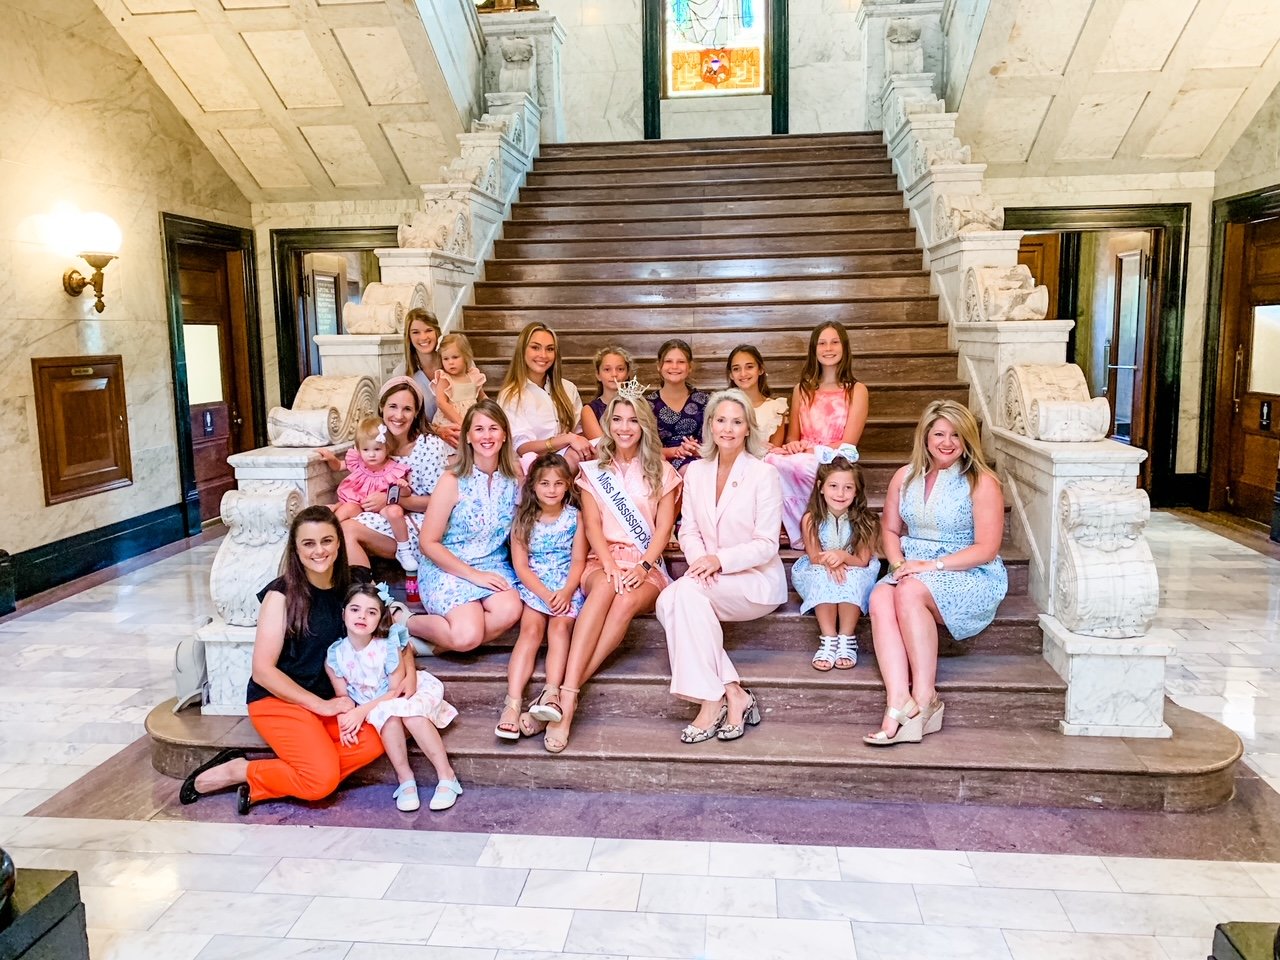 Pictured, from left to right, Ashley and Cora Thompson, Elizabeth and Louise Ford, Martha Grace and Ann Lyles Gray, Outstanding Teen Tori Johnston, Representative Jill Ford, Anna Crawford and Loraleigh Phillips, Leyna and Savannah Ford, Audrey Eckerson, Cara Hall, Maris Walters, Olivia Thompson, and Reese Hall.